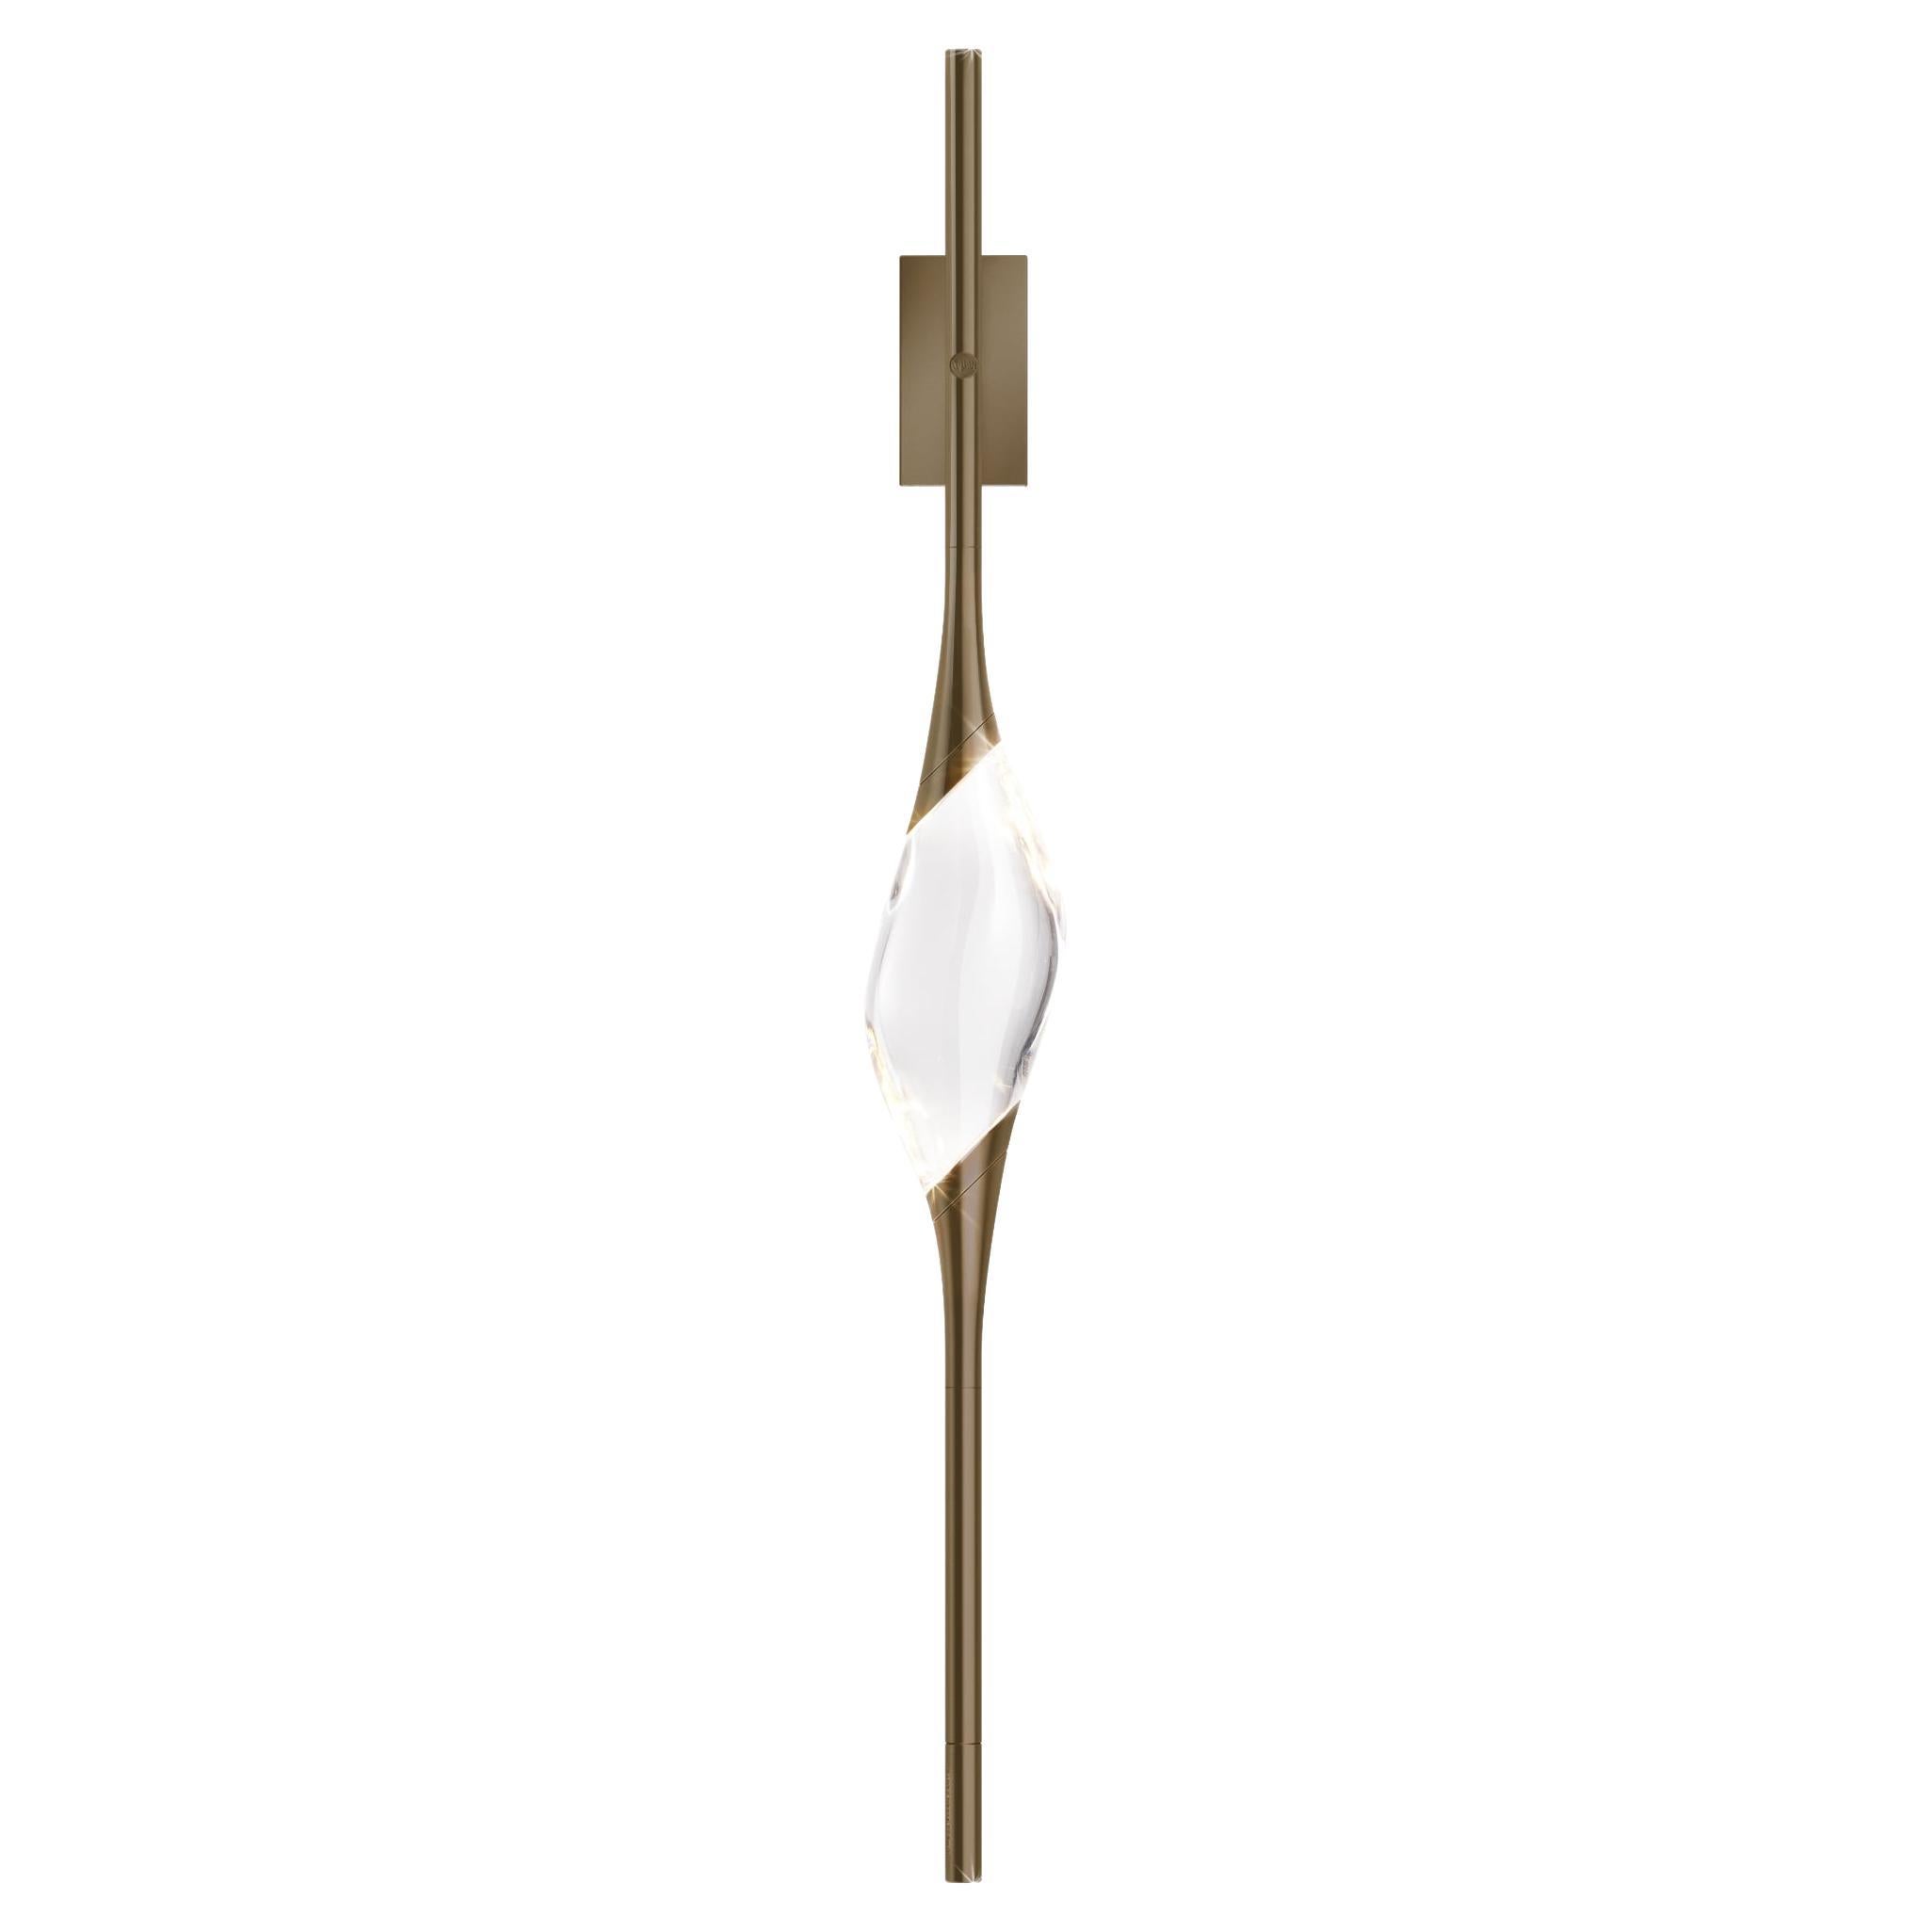 "Il Pezzo 12 Wall Sconce" - bronze - crystal - LEDs - Made in Italy For Sale